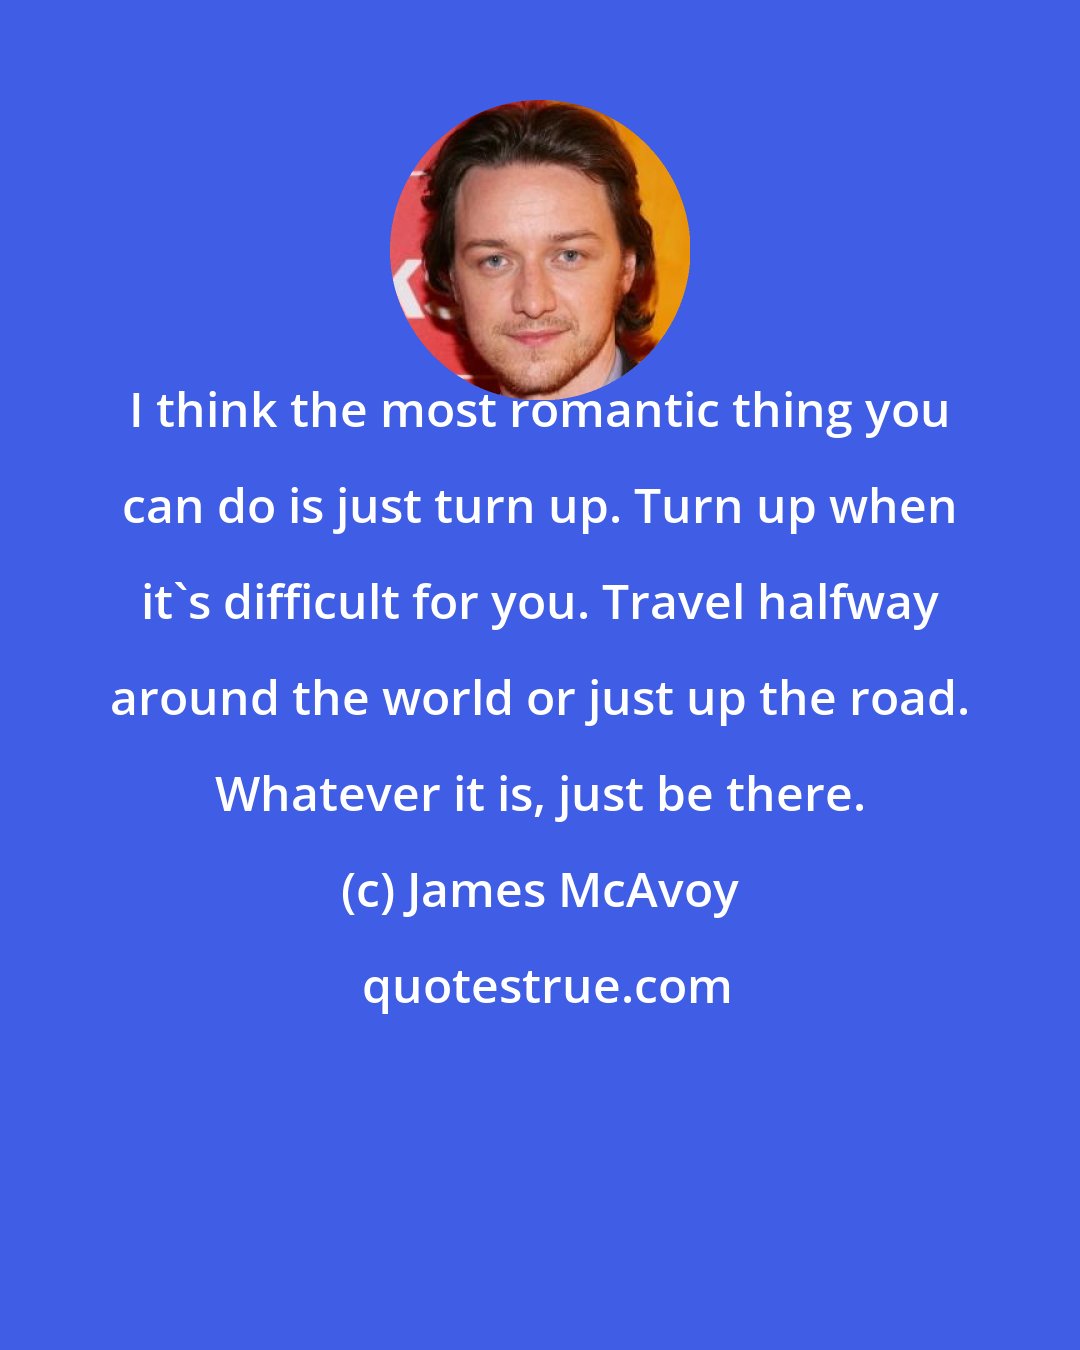 James McAvoy: I think the most romantic thing you can do is just turn up. Turn up when it's difficult for you. Travel halfway around the world or just up the road. Whatever it is, just be there.